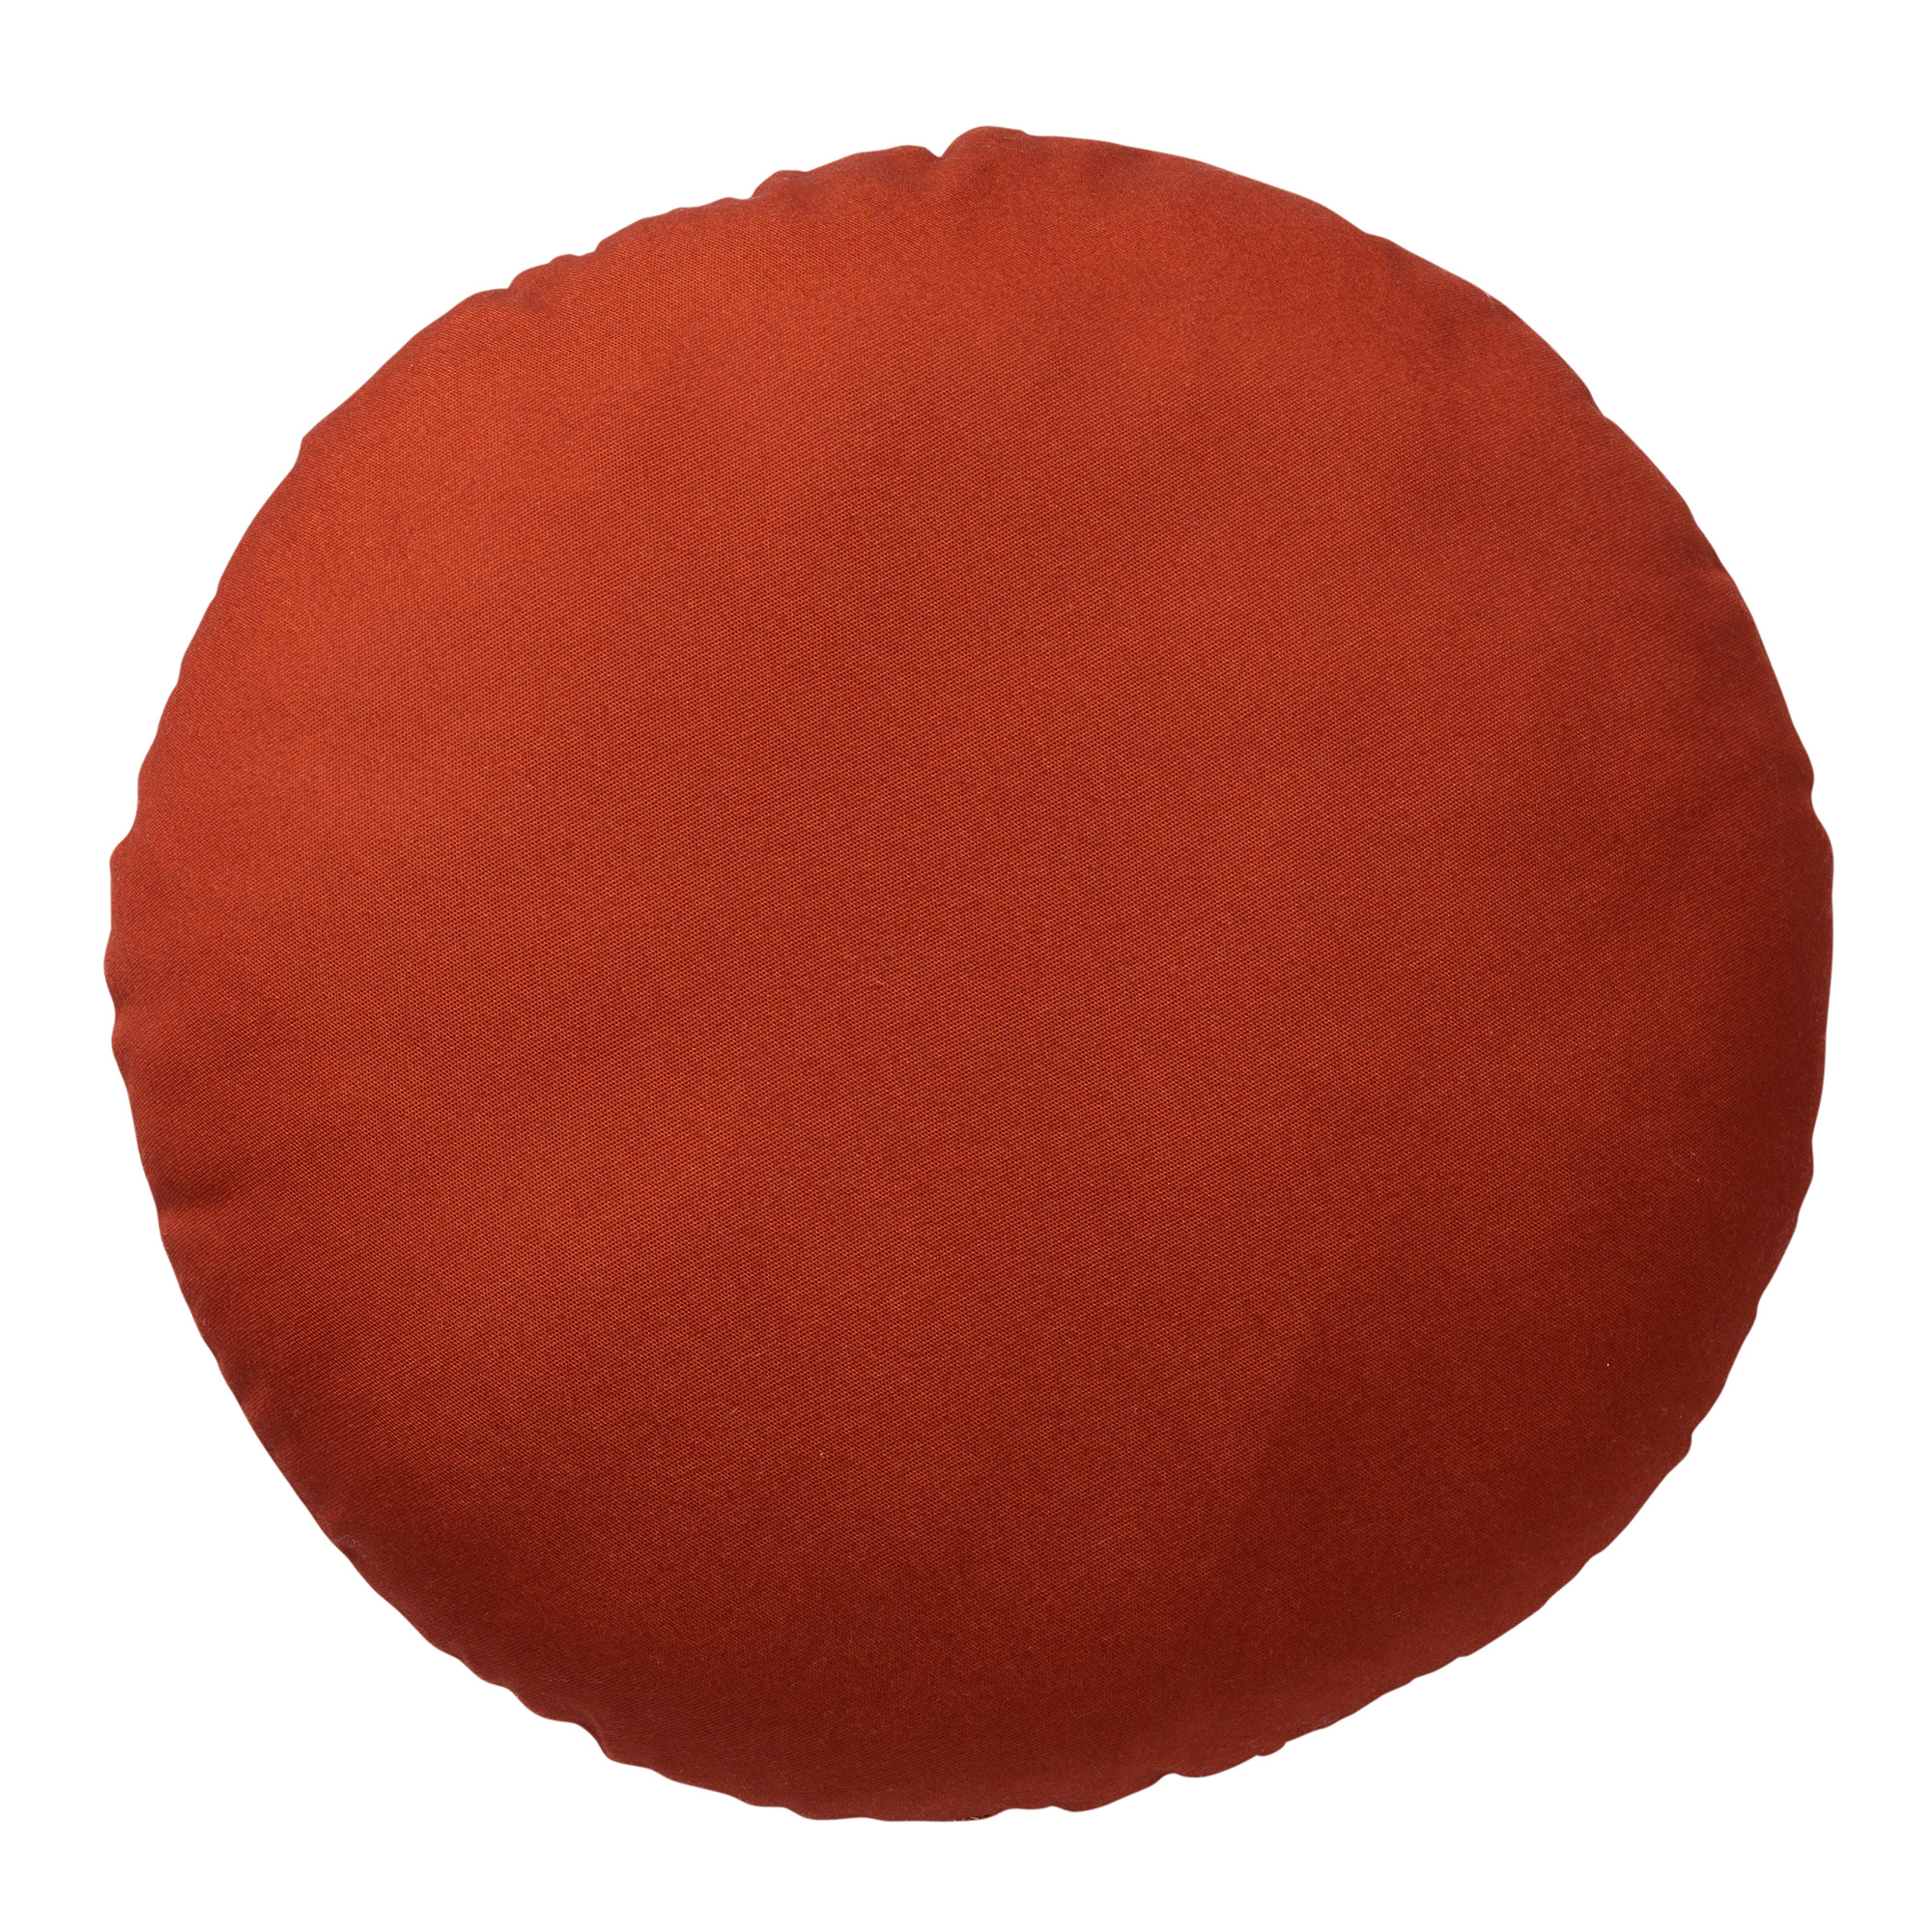 SOL - Cushion round outdoor 40 cm Potters Clay - water-repellent and uv-resistant - orange